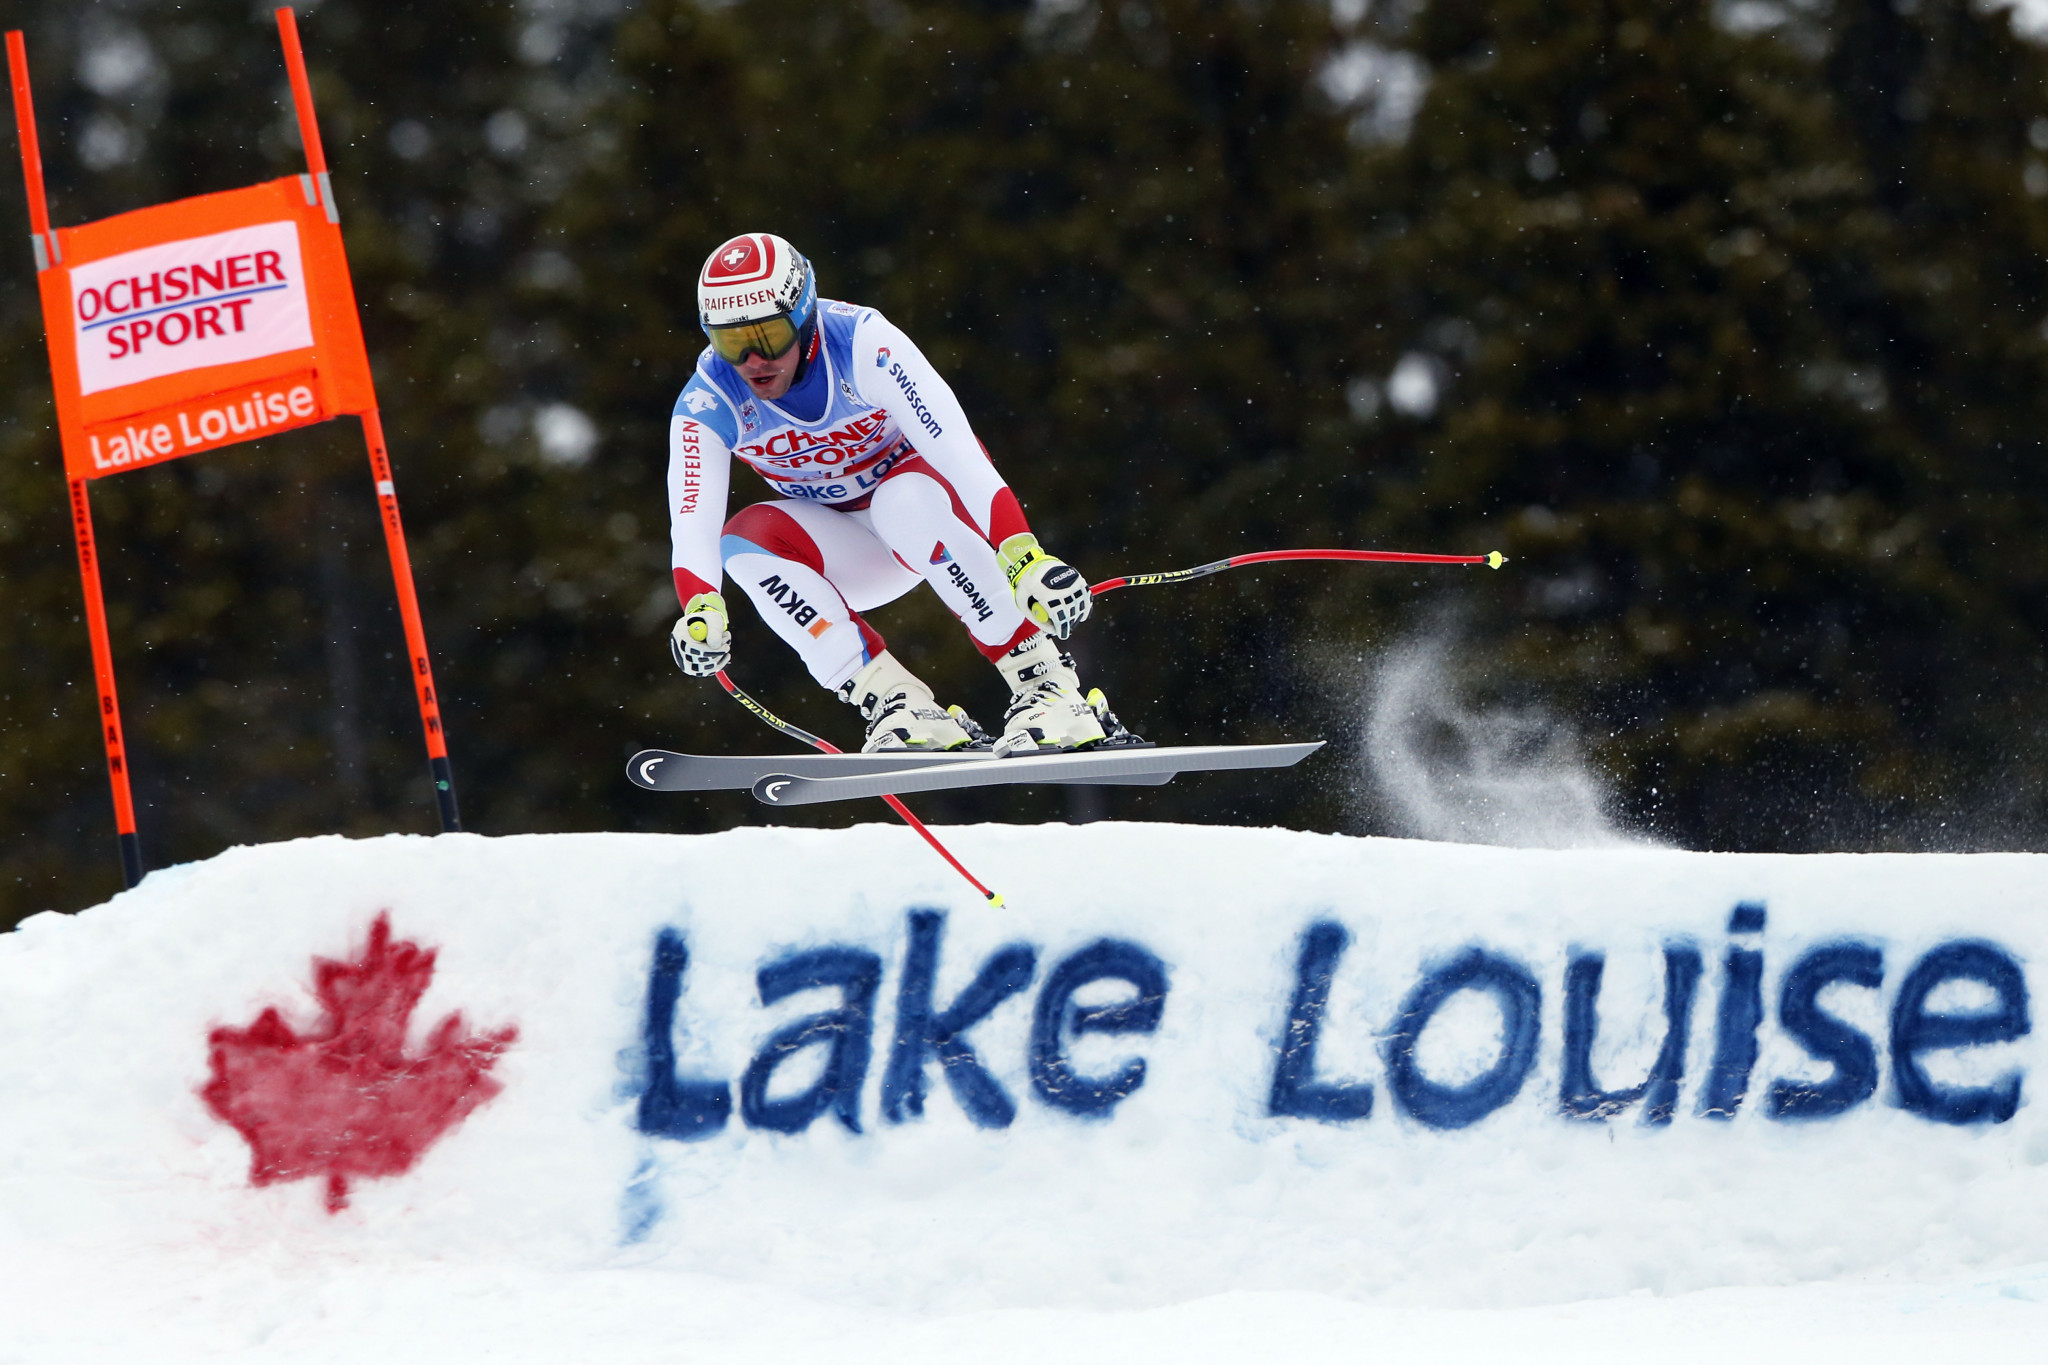 North American Alpine Ski World Cup races removed from calendar due to COVID-19